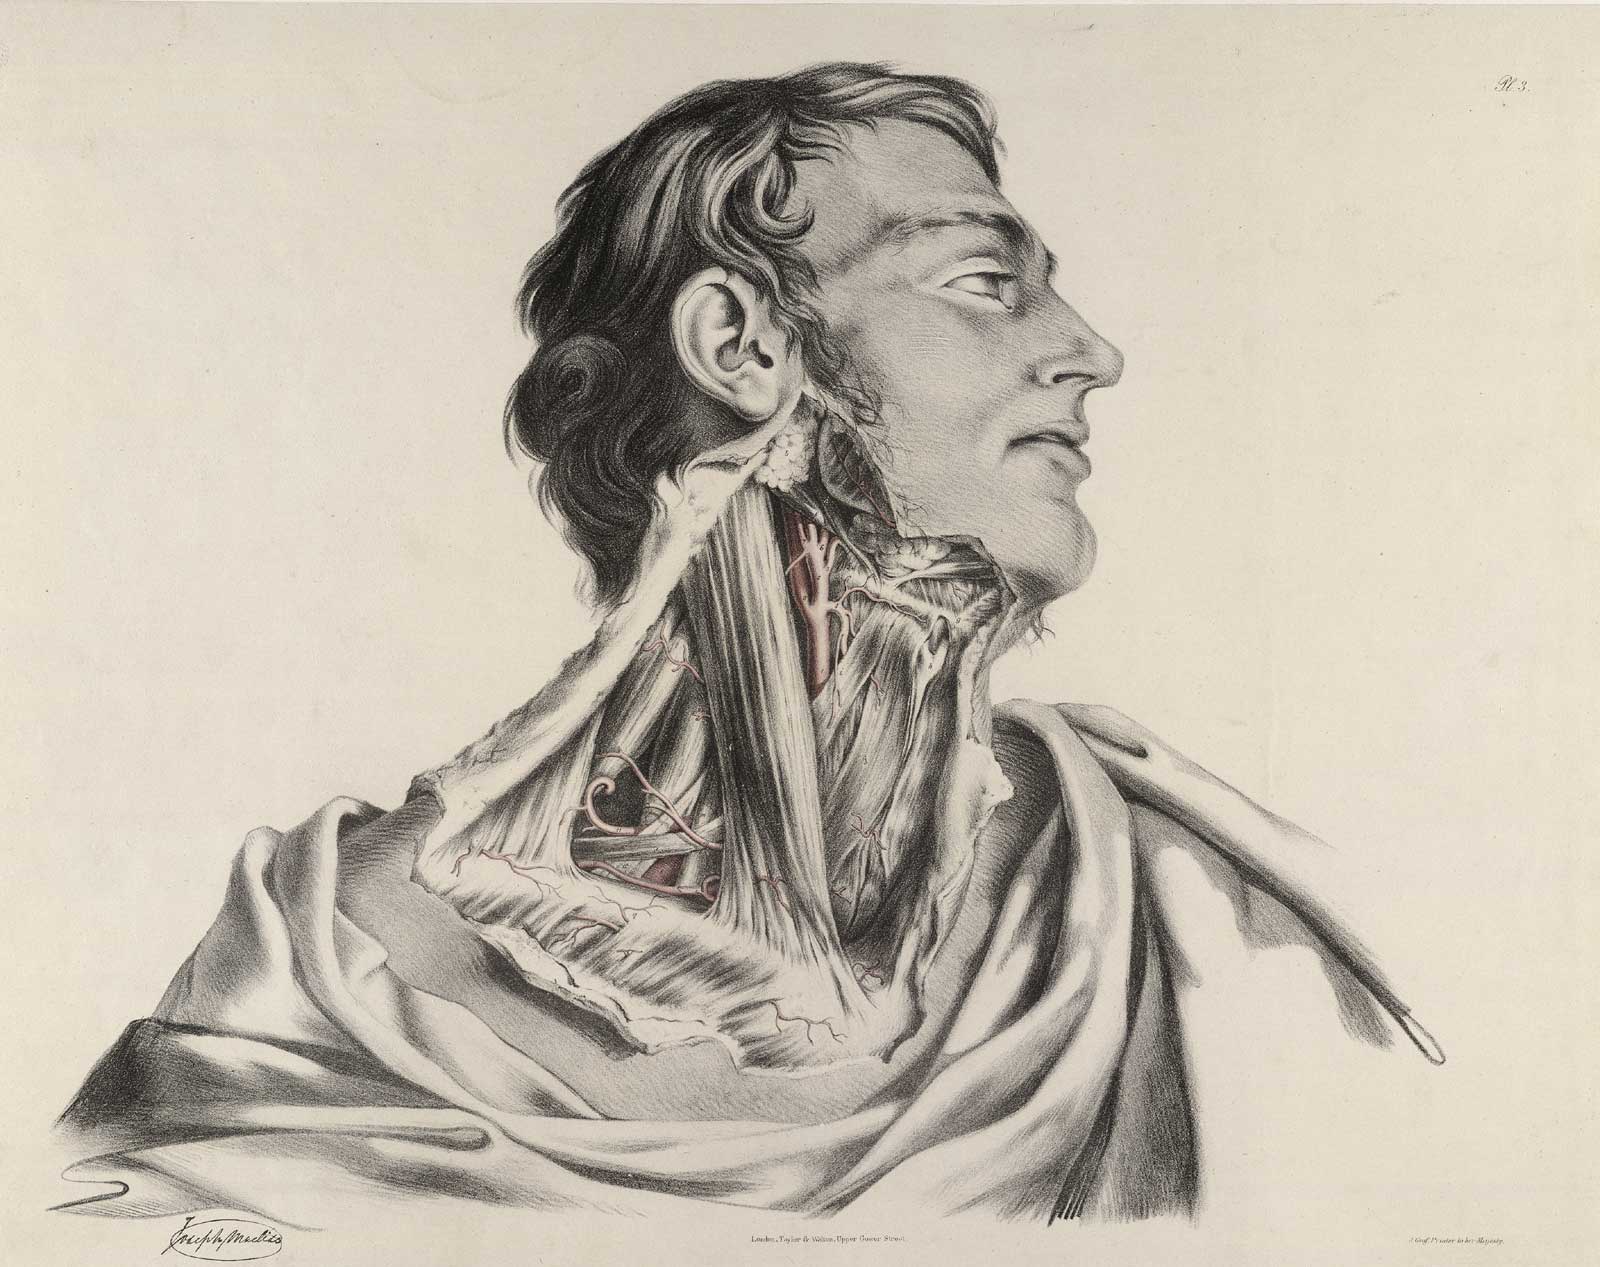 Plate 3 of Quain's The anatomy of the arteries of the human body, with its applications to pathology and operative surgery, featuring the right side view of the flayed body of a male corpse from the collarbone to the ear displaying the muscles, nerves and arteries of the neck.